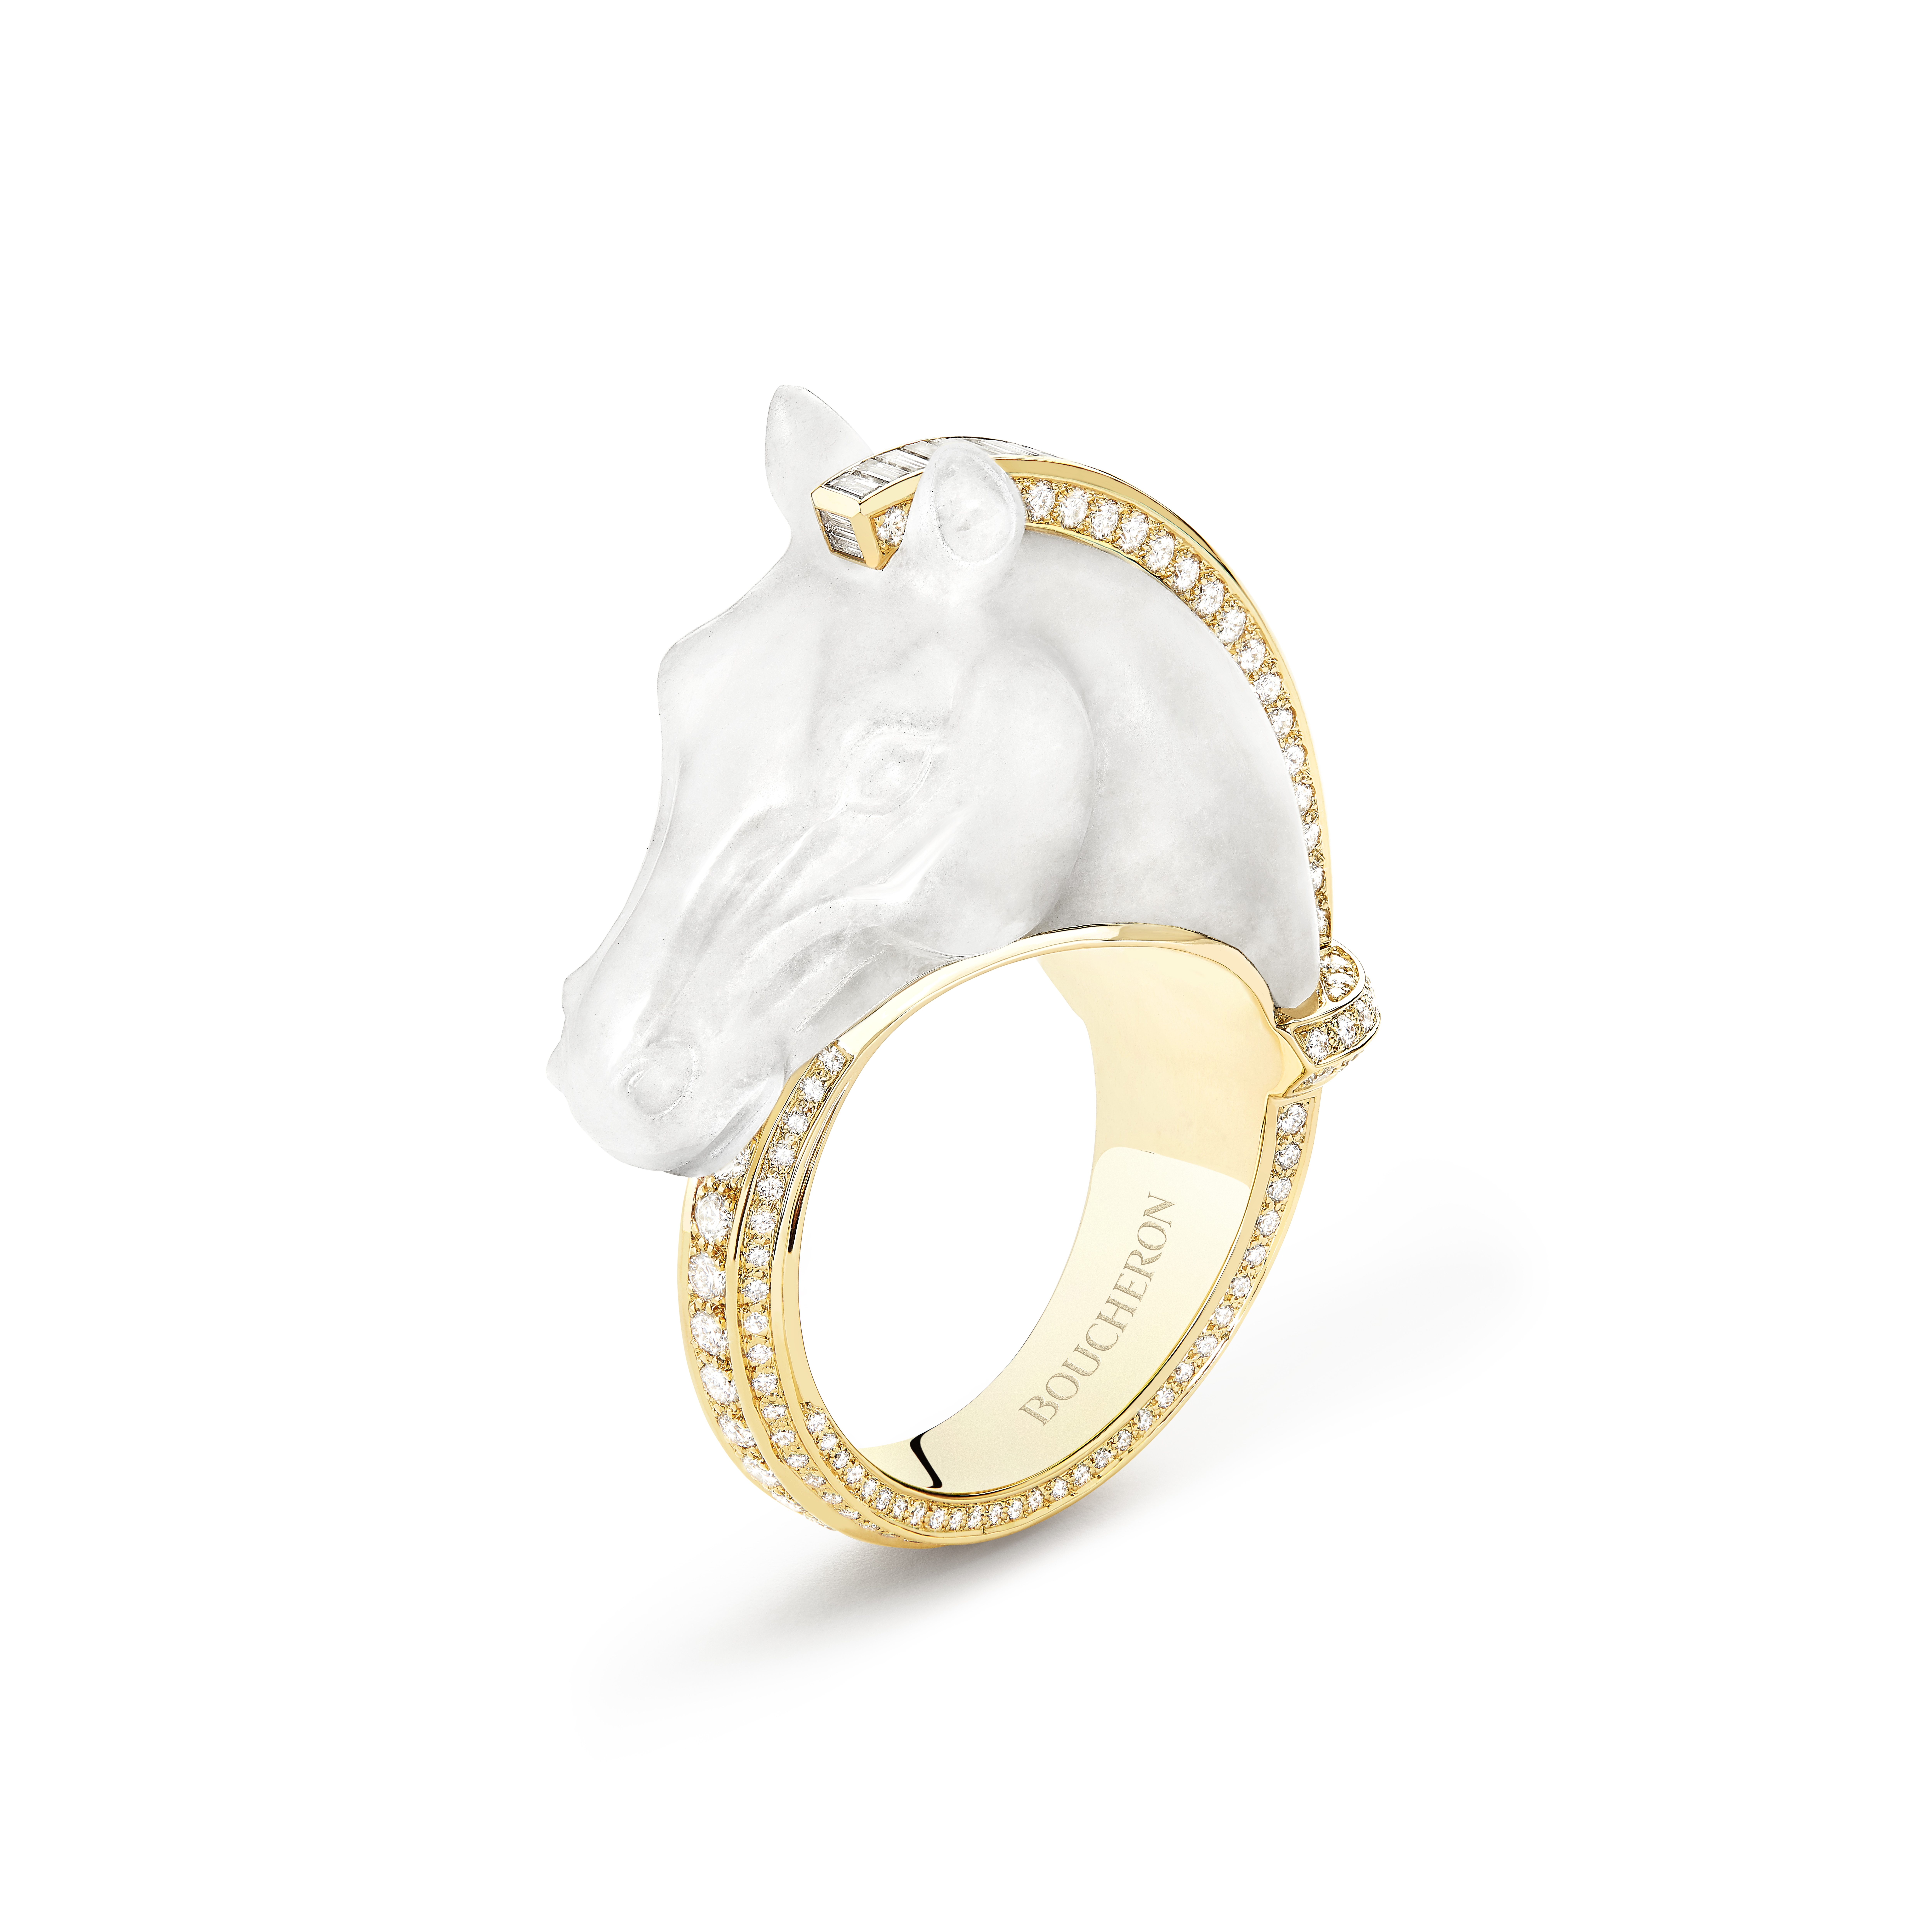 Boucheron’s Cheval de l’Opera ring, set with frozen quartz and baguette diamonds and paved with diamonds, in yellow gold, forms part of the luxury jeweller’s vu du 26 high jewellery collection.